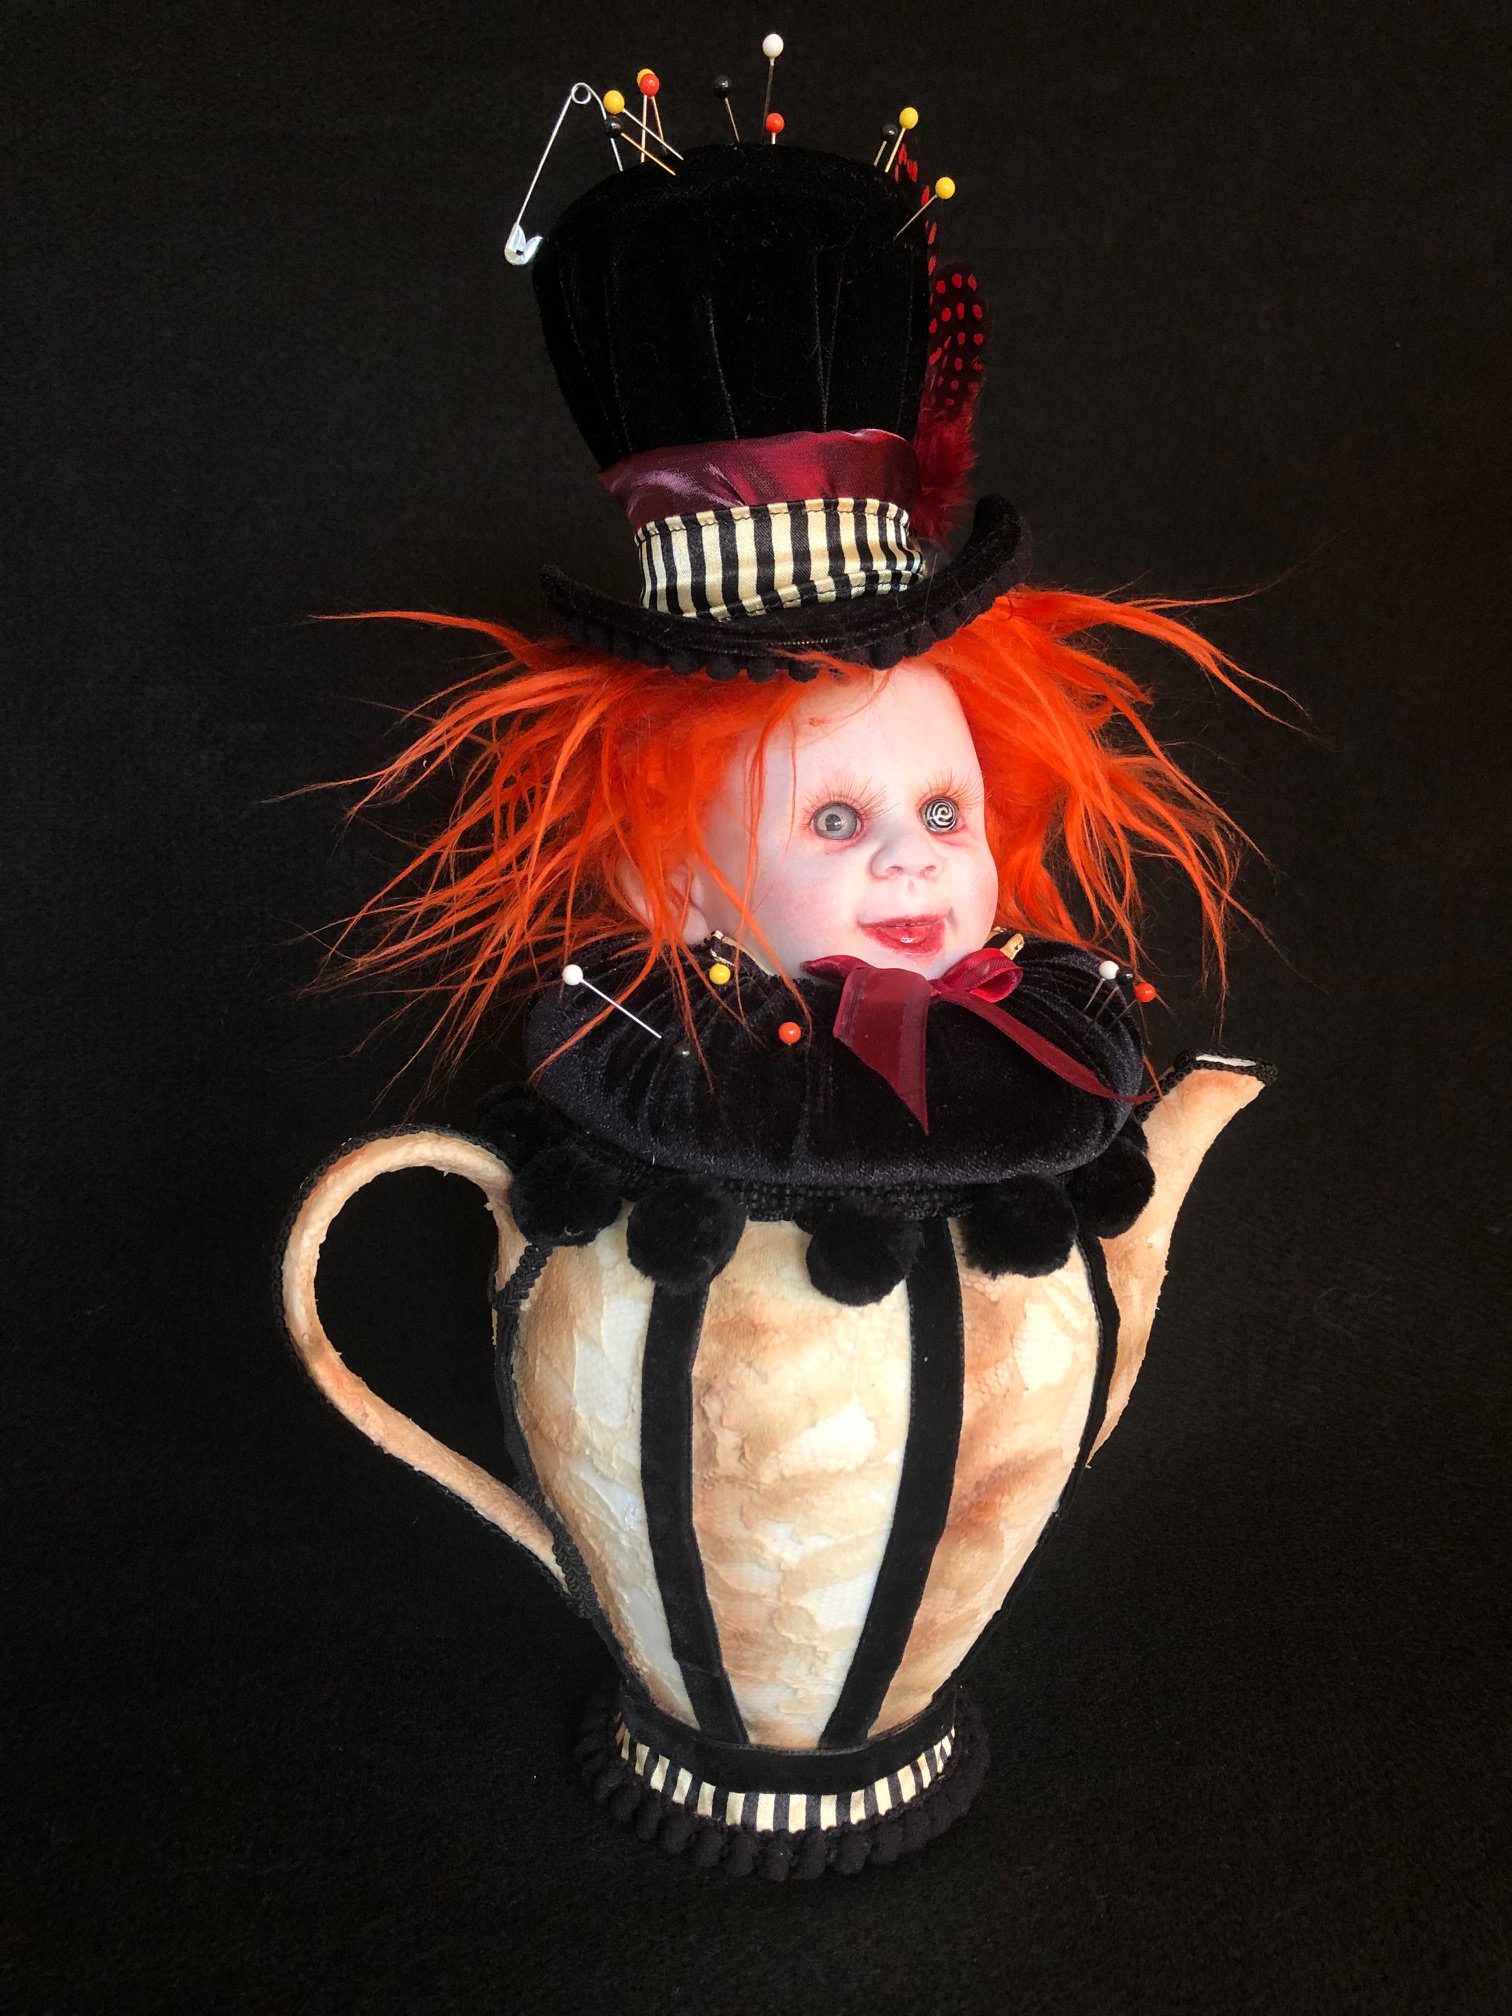 mad hatter themed pincushion porcelain doll head with bright orange hair and velvet tophat sits on a black velvet cushion set in a lace-covered porcelain teapot